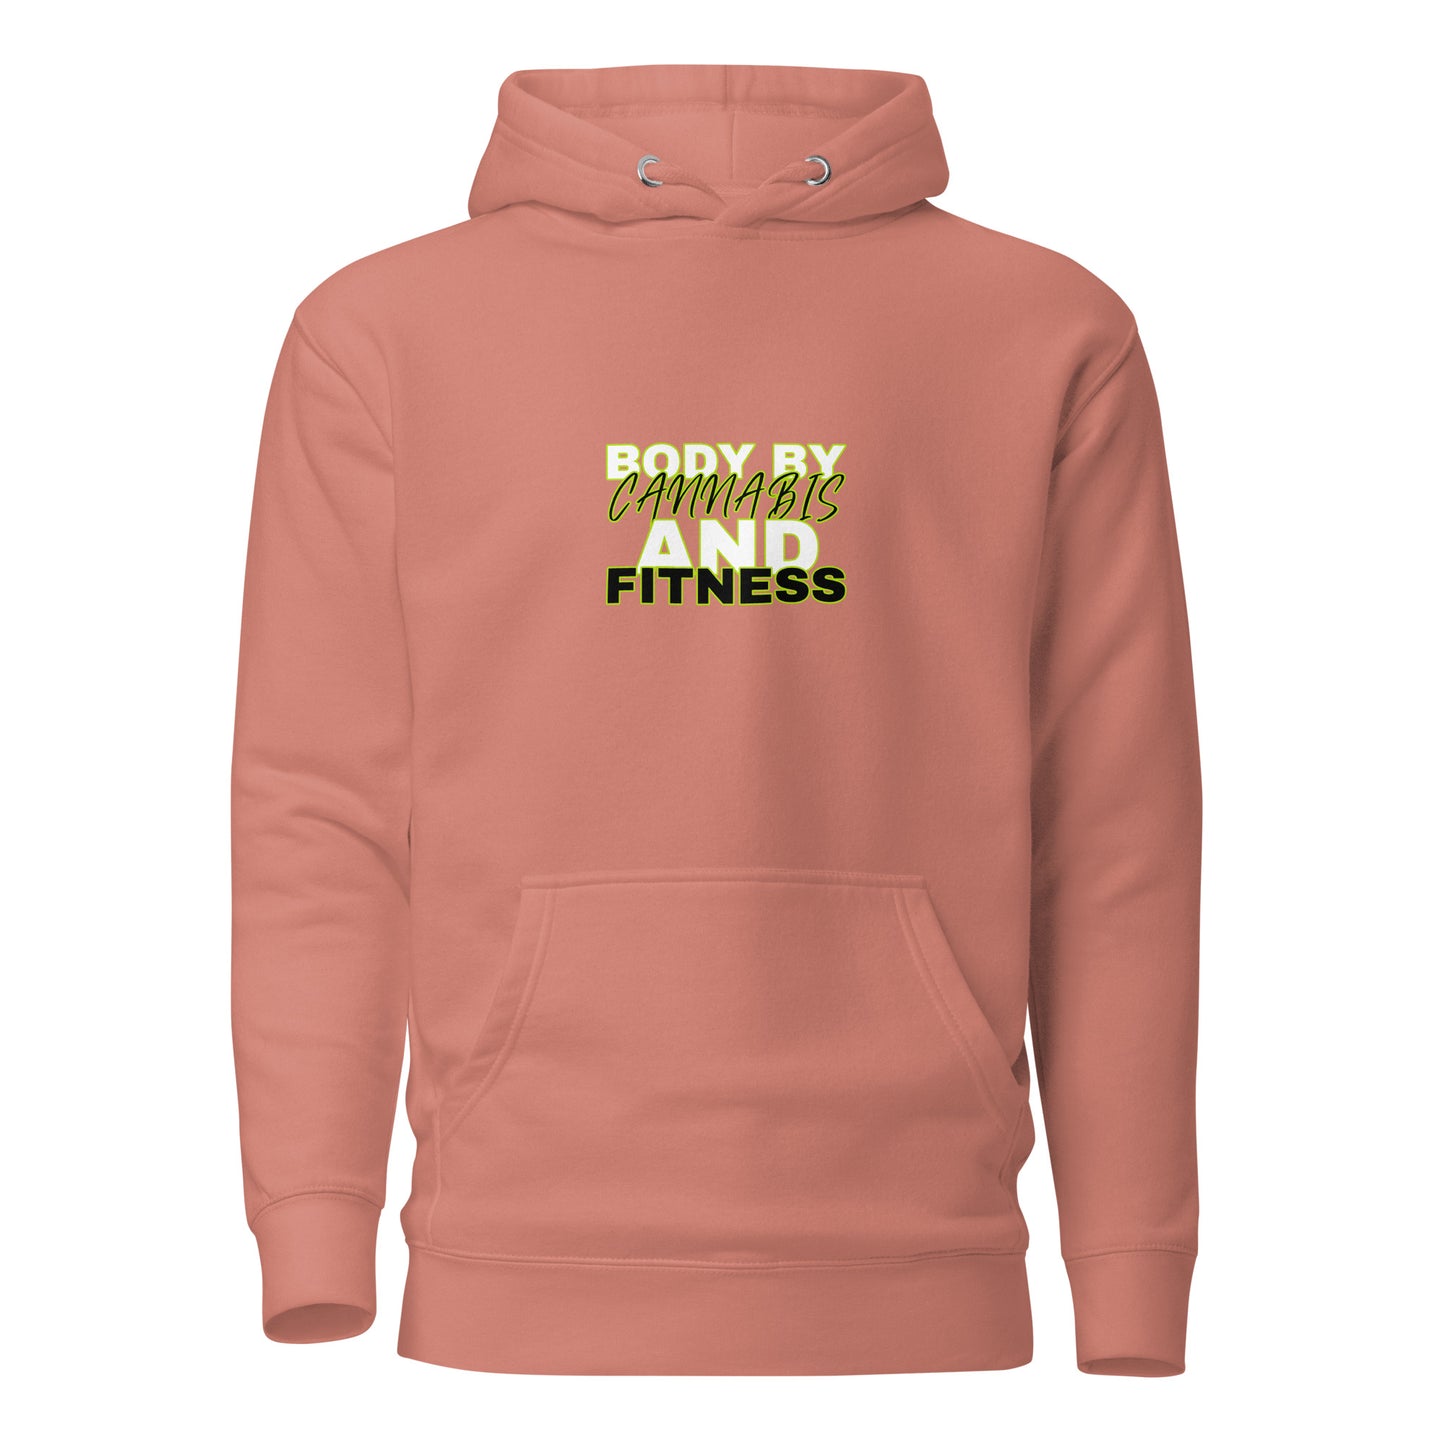 Body By Cannabis And Fitness Unisex Hoodie